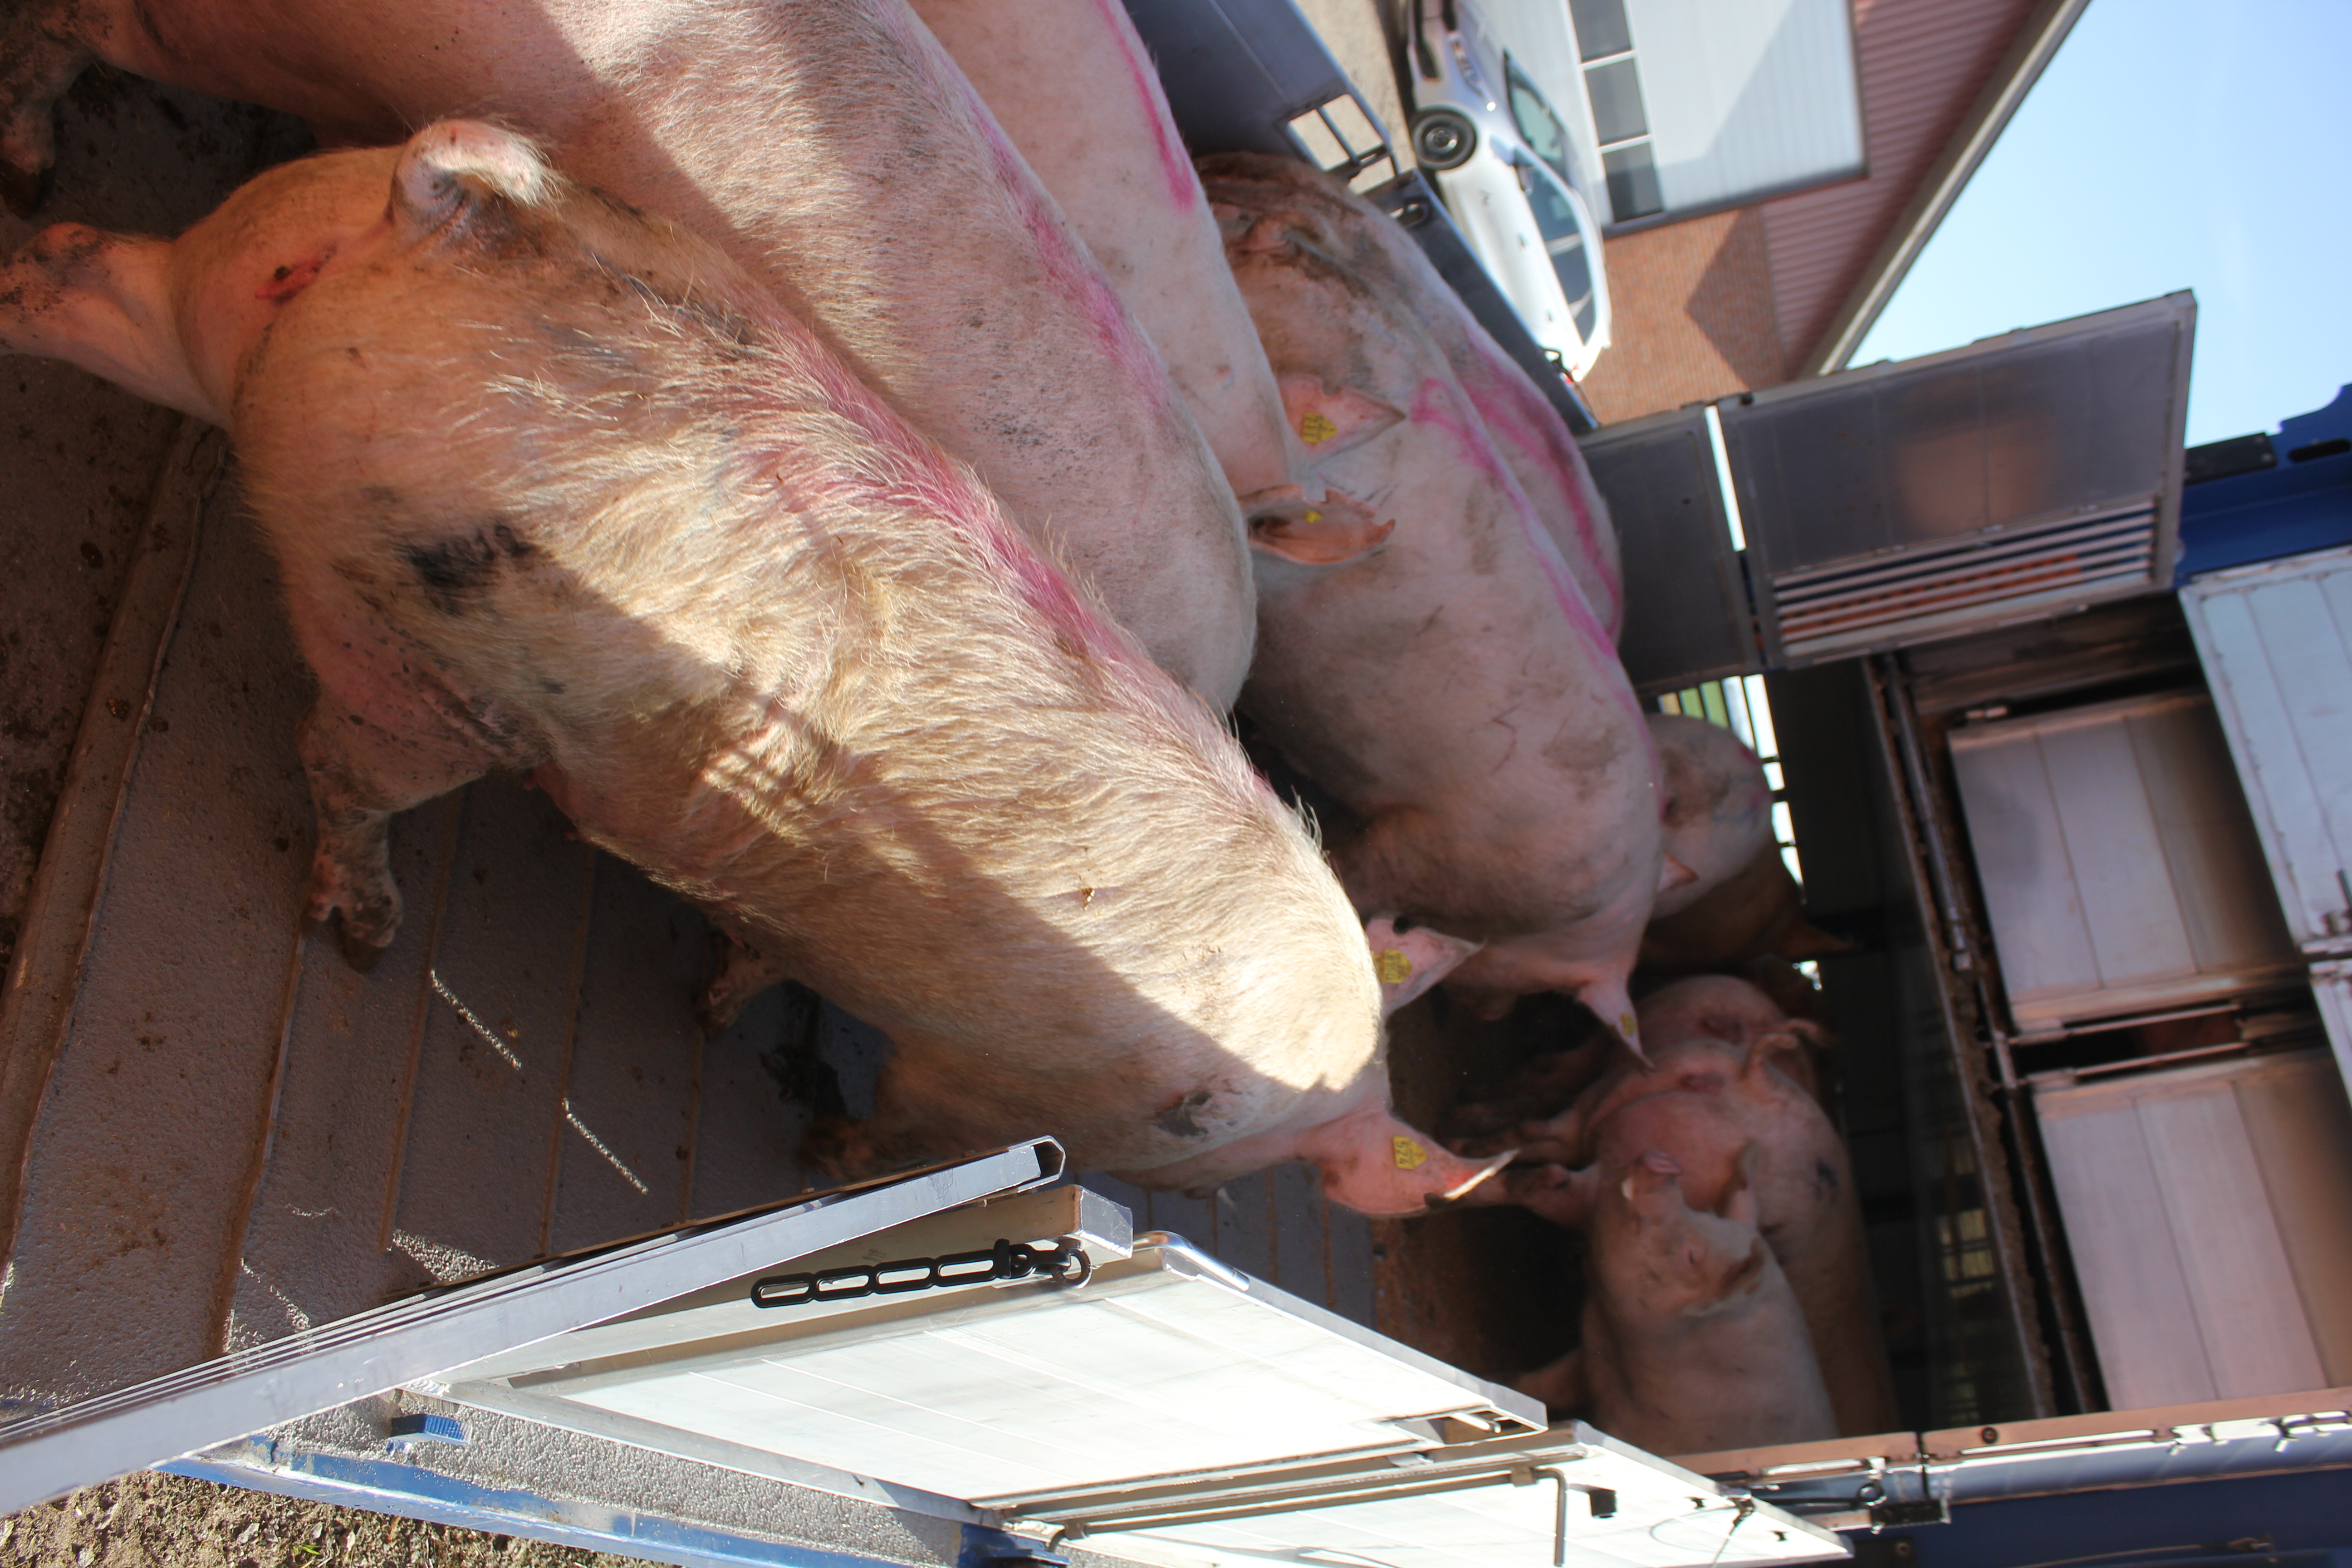 Sows being loaded onto a truck